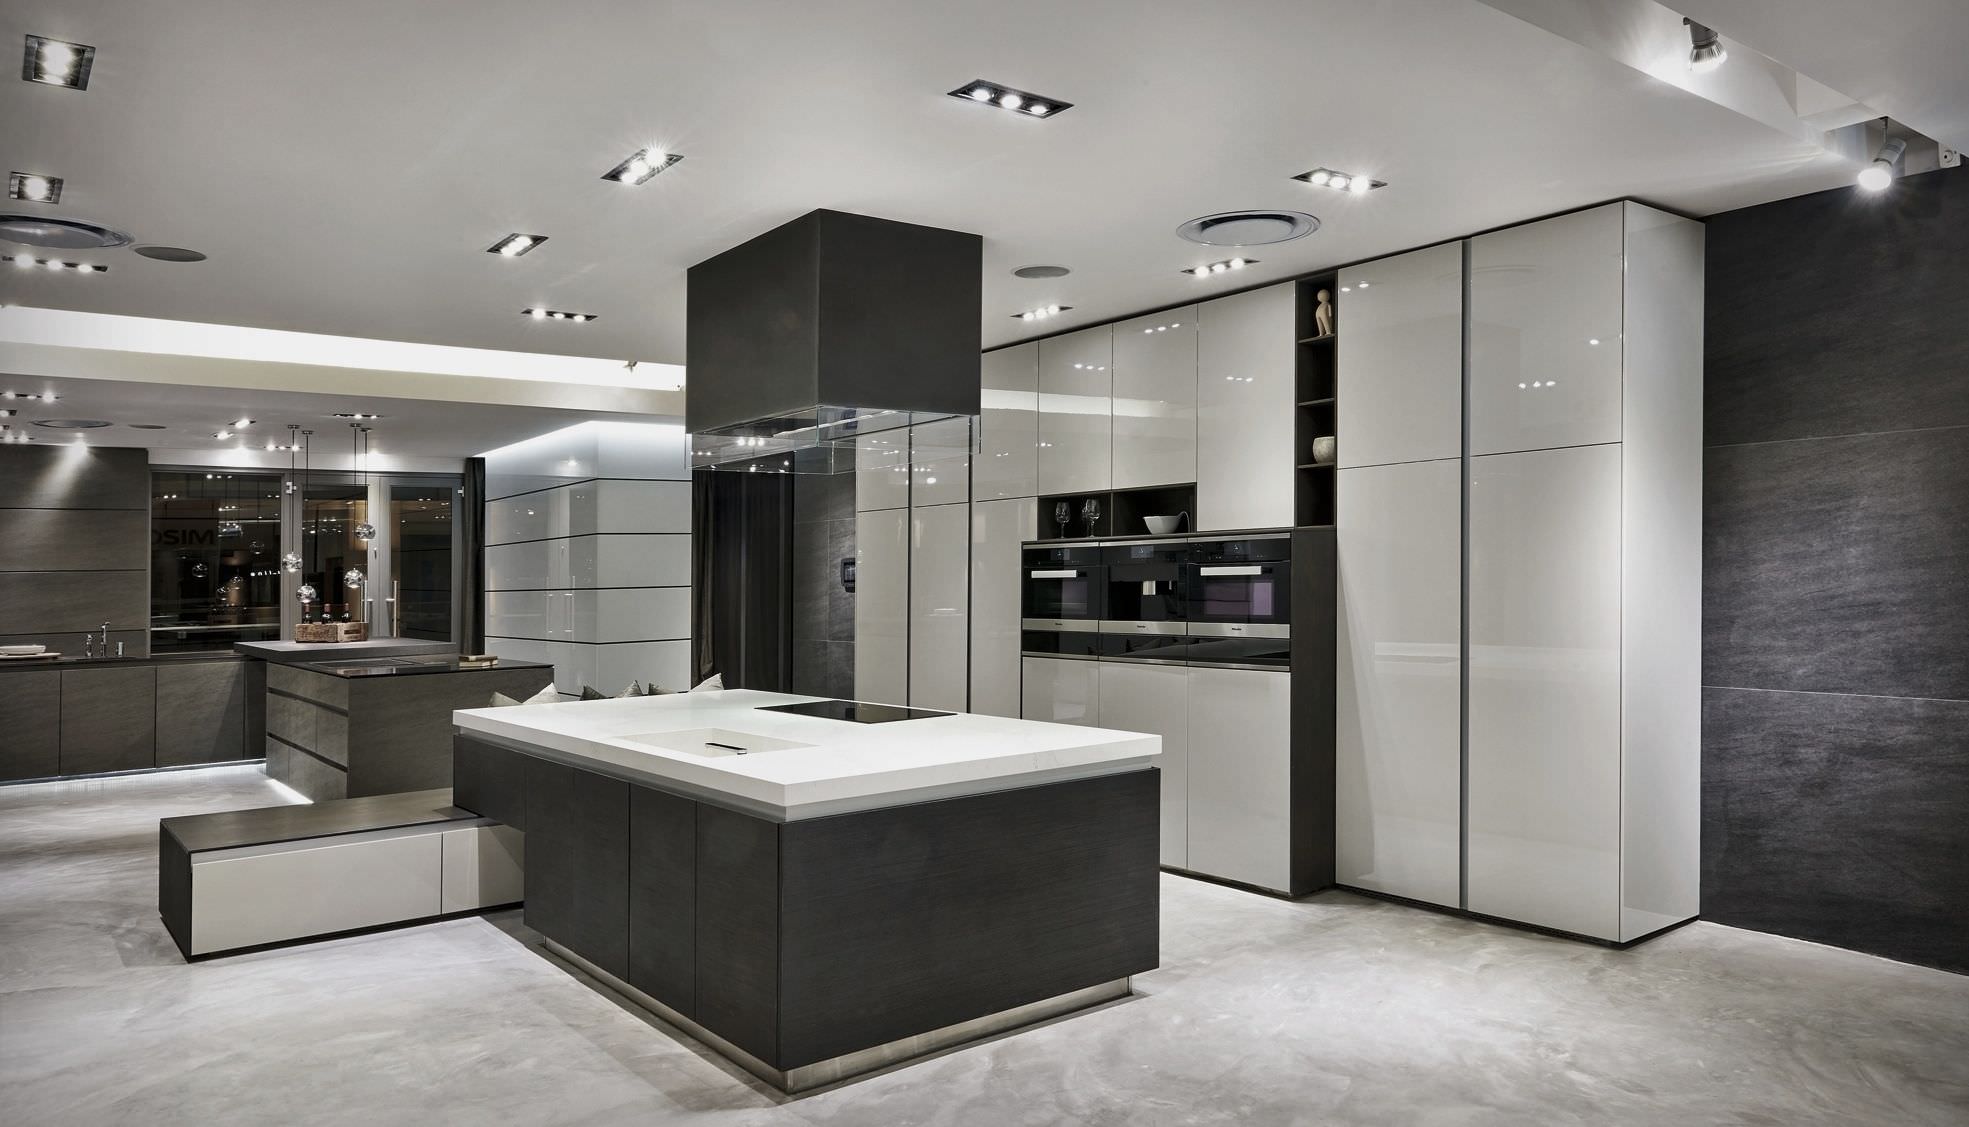 Kitchen Showroom Design Ideas with Images